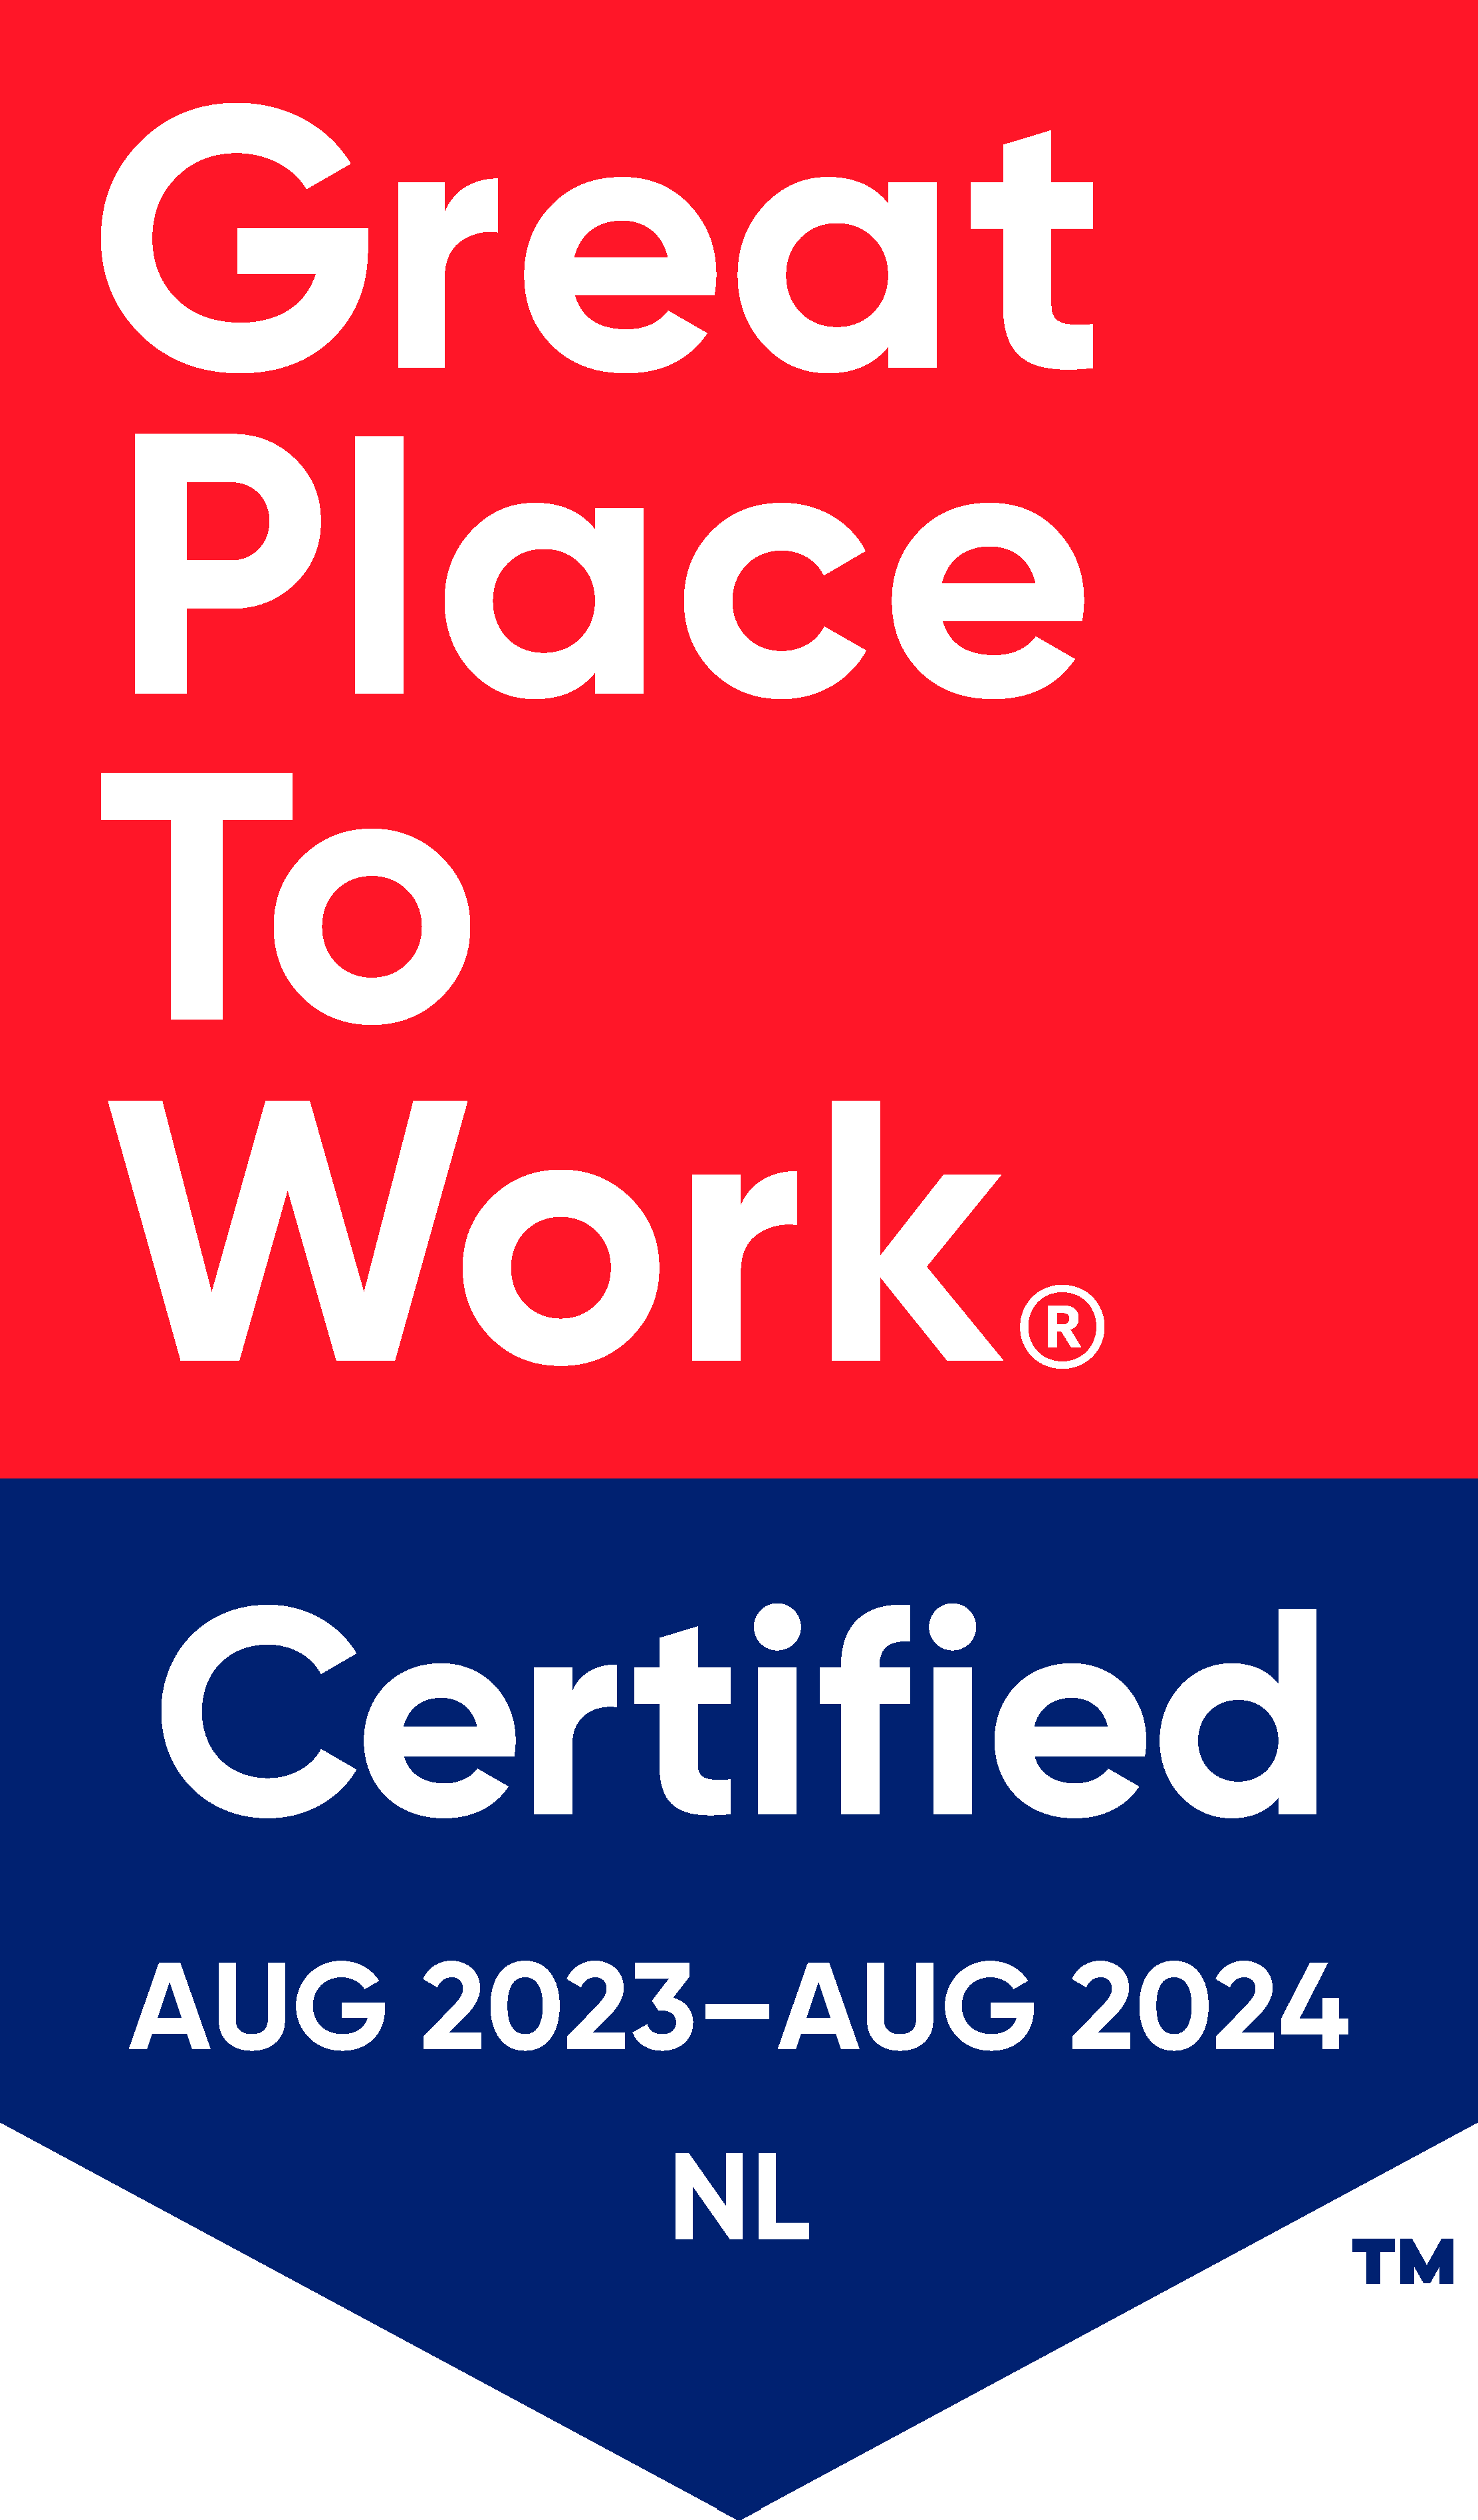 Nedflex is Great Place to Work Certified!